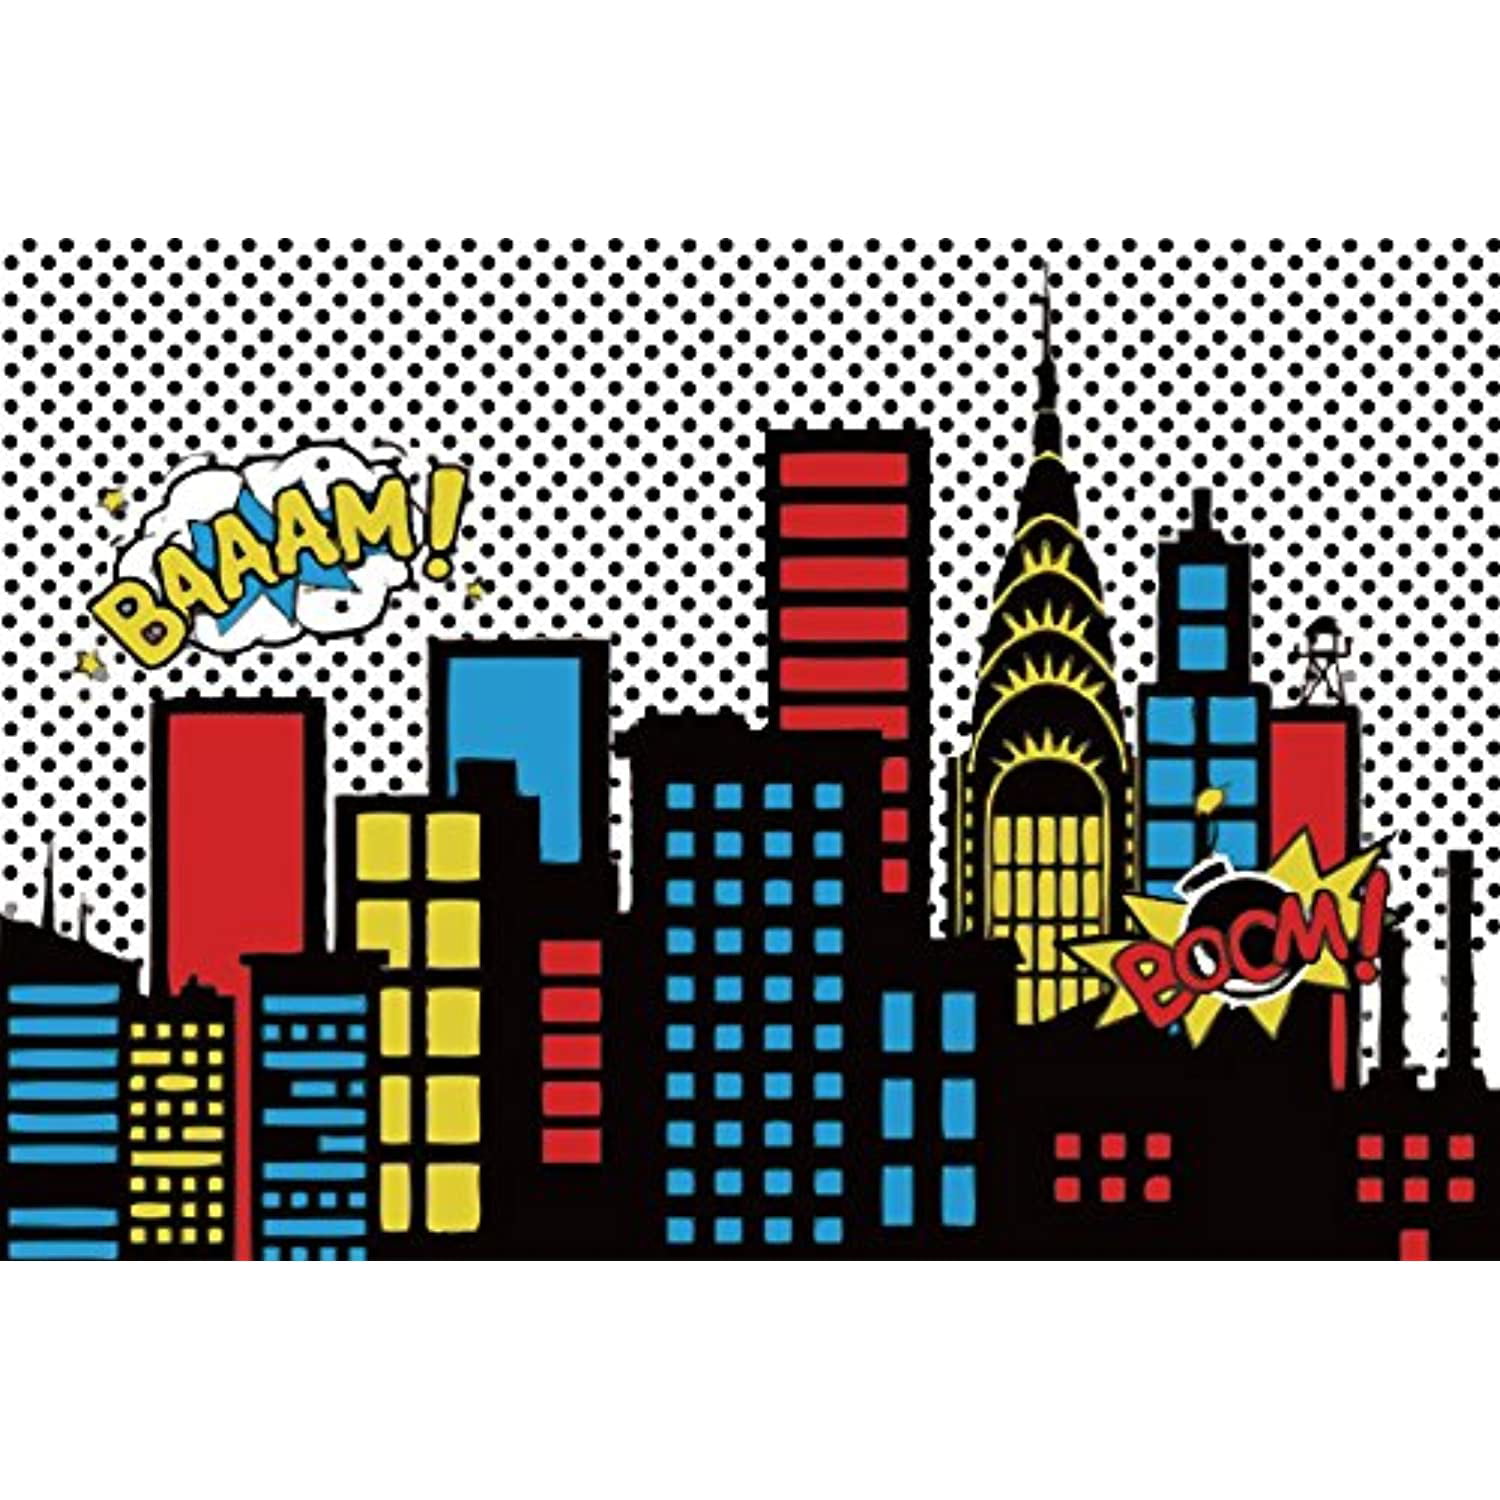 Yeele 6x6ft Superhero City Photography Backdrop Vinyl Humor Cartoon Comic Justice Super Hero Baby Shower Party Photo Background City Building Customized for Girl Child Birthday Party Studio Props 